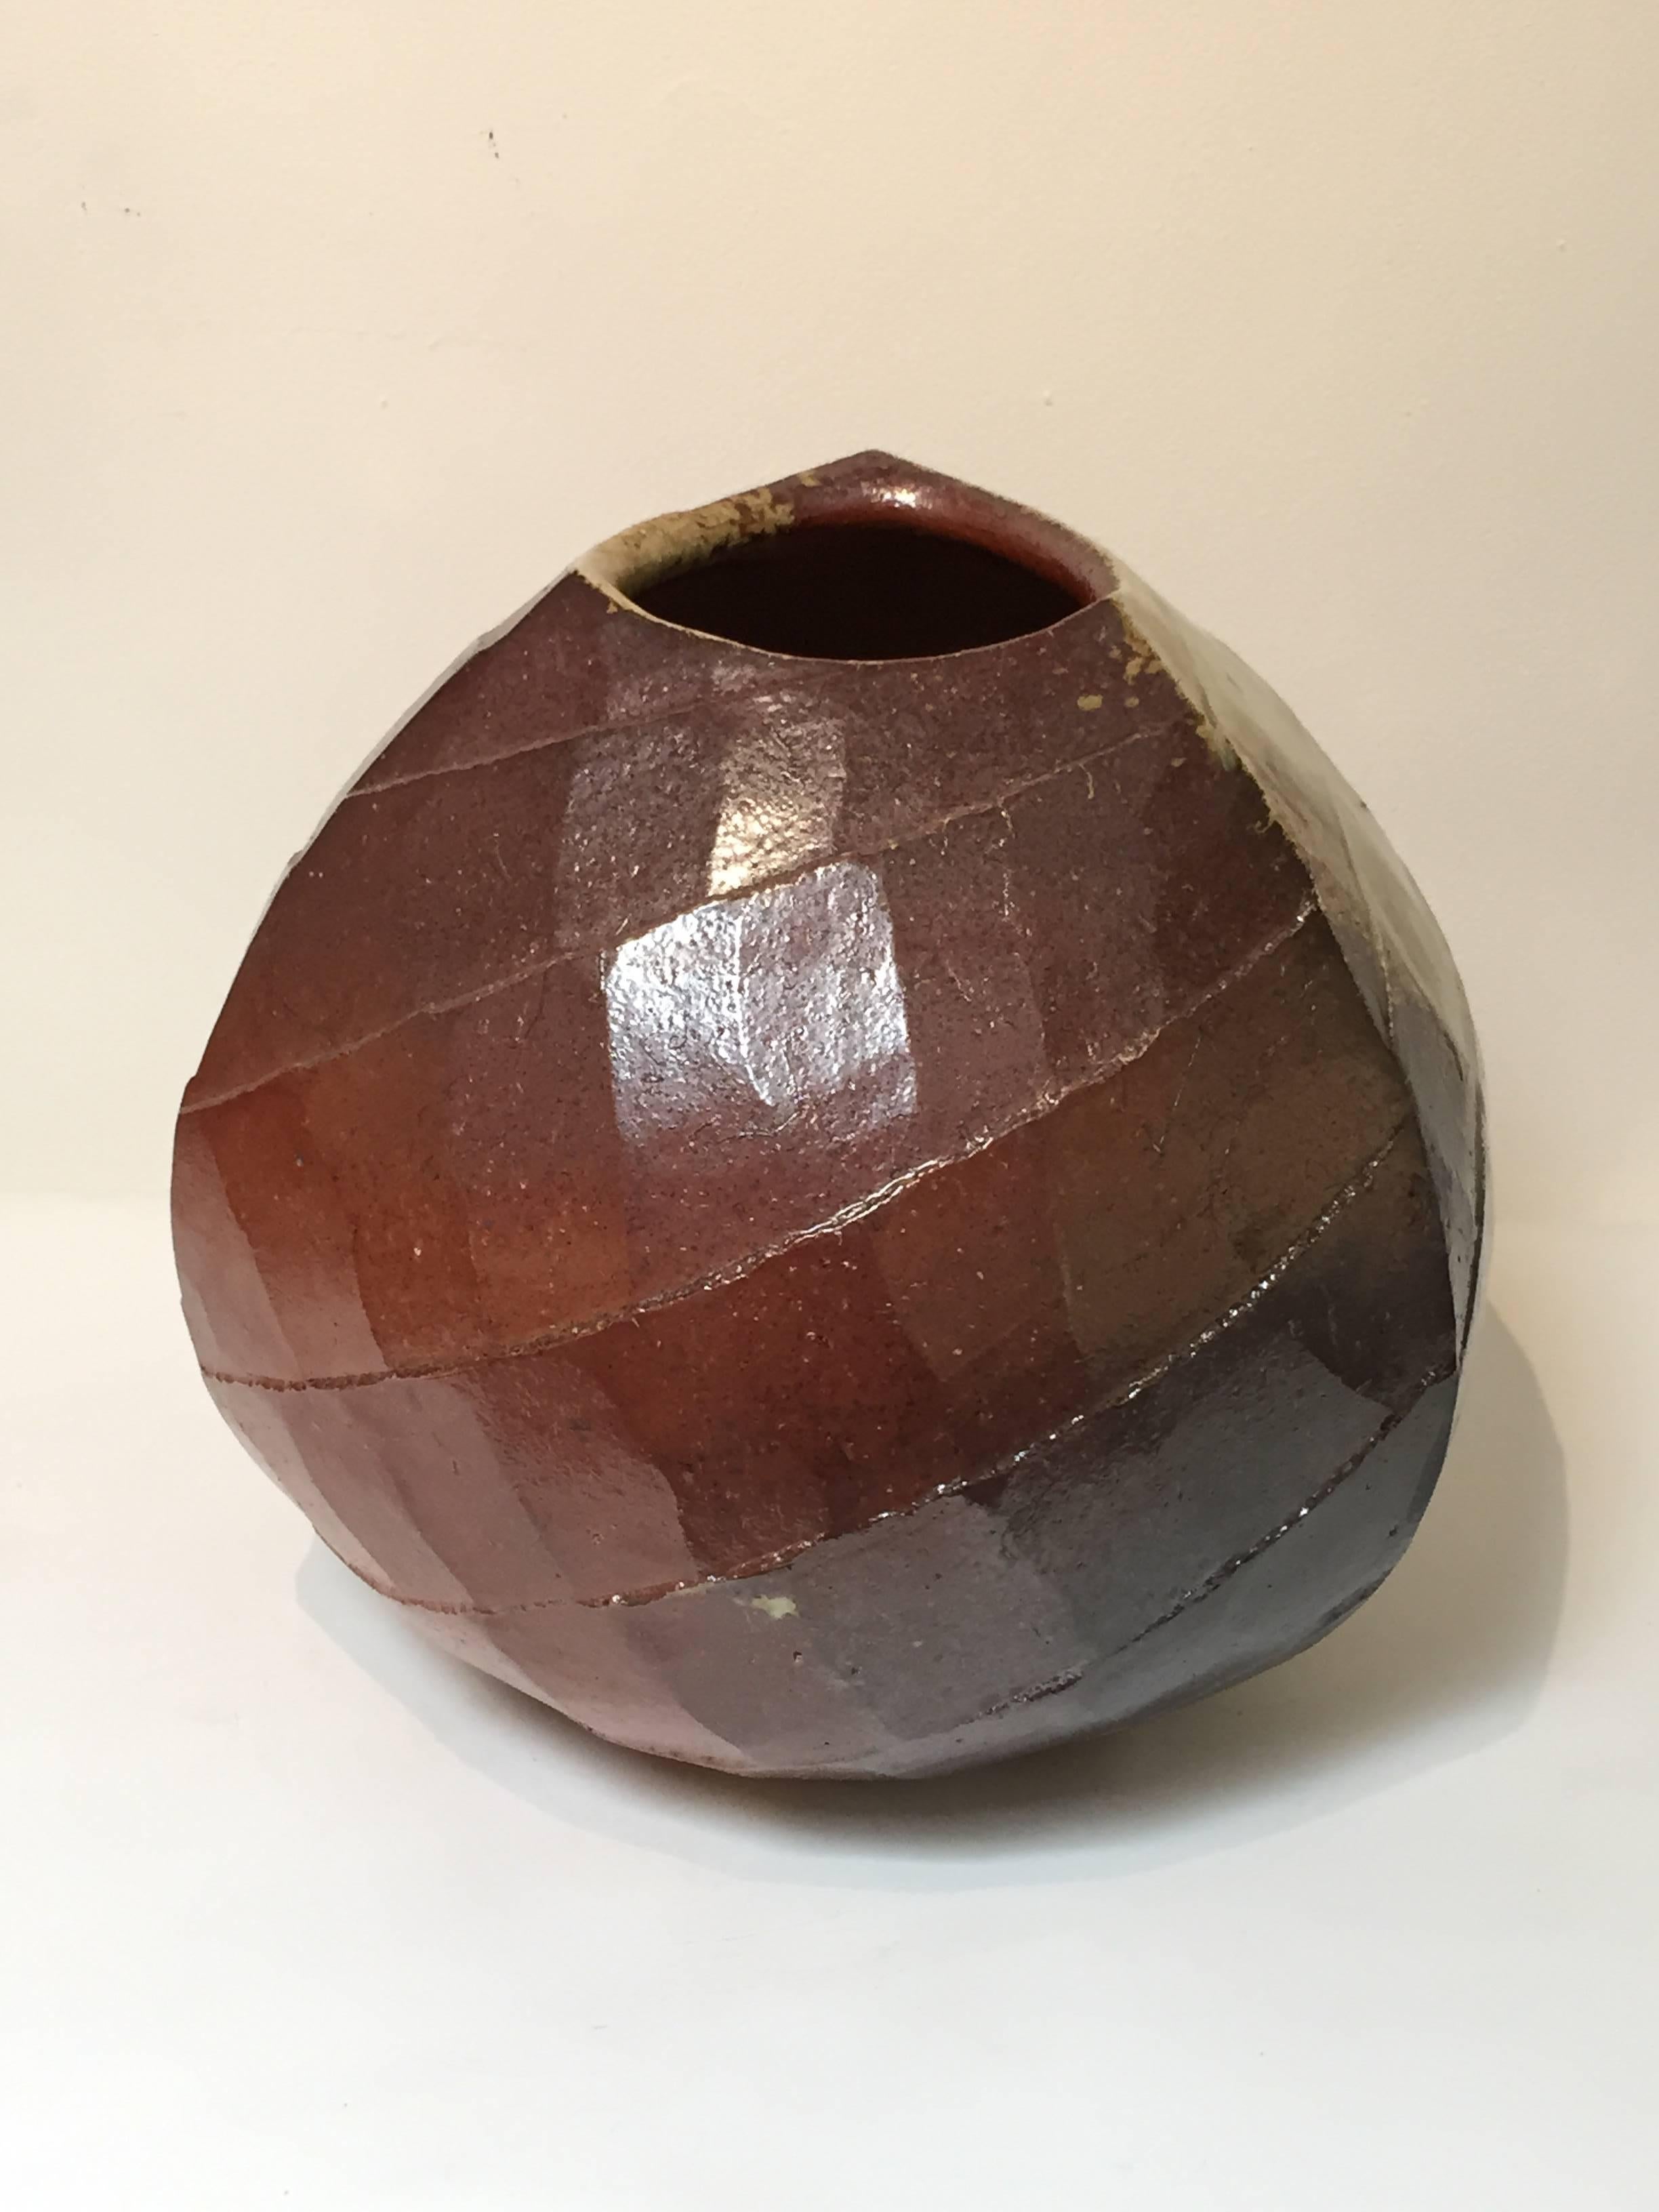 
A Rounded triangular vessel with diagonally faceted exterior.
Natural ash-glazed stoneware. 
Made by internationally known ceramic artist Nishihata Tadashi (born 1948 - ). He's received countless awards, and selected public collections are in many